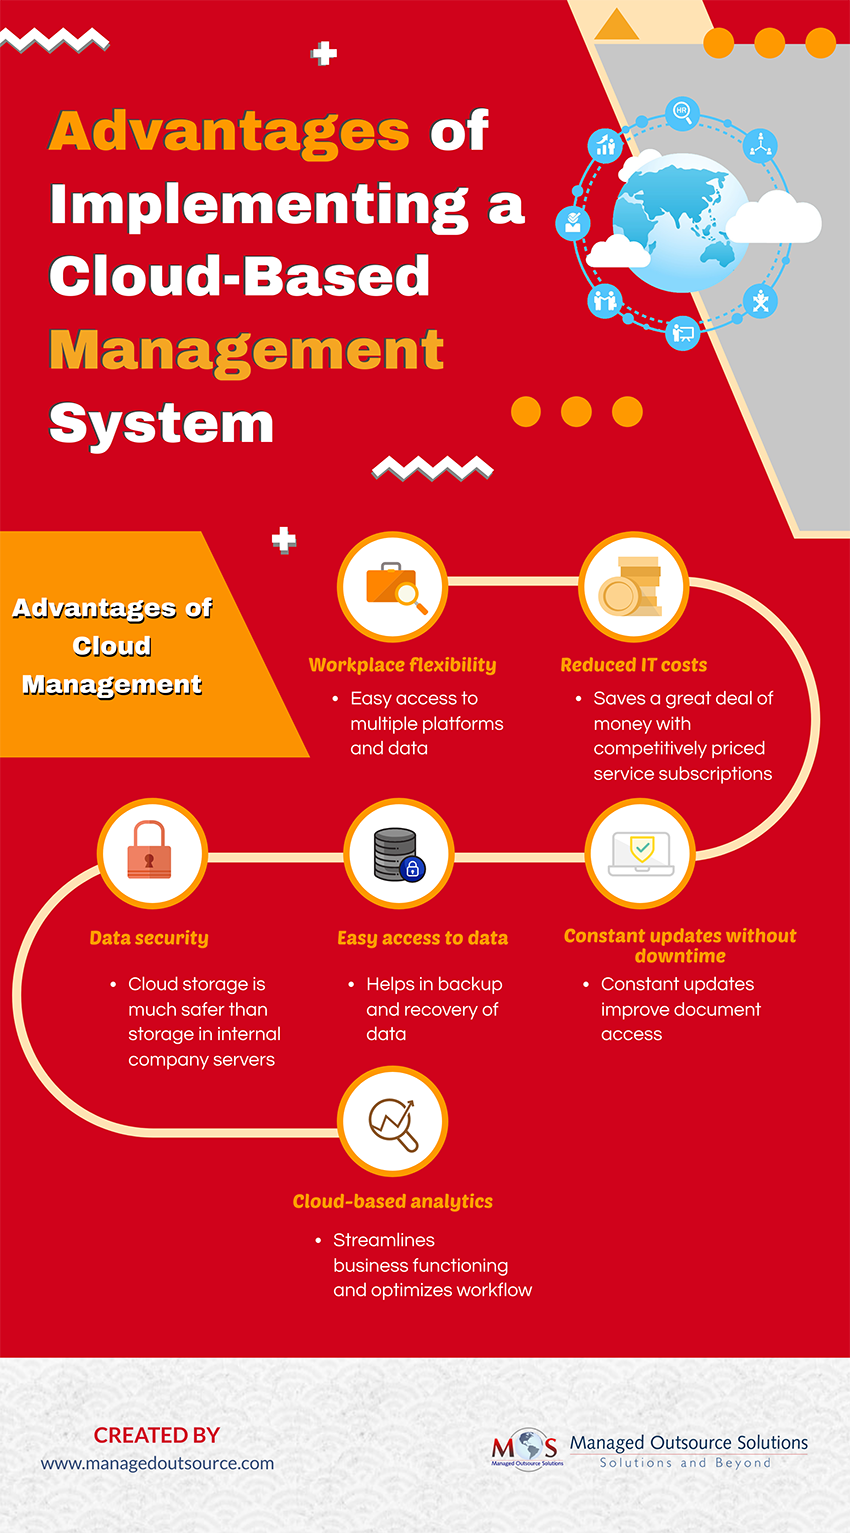 Advantages of Implementing a Cloud-Based Management System